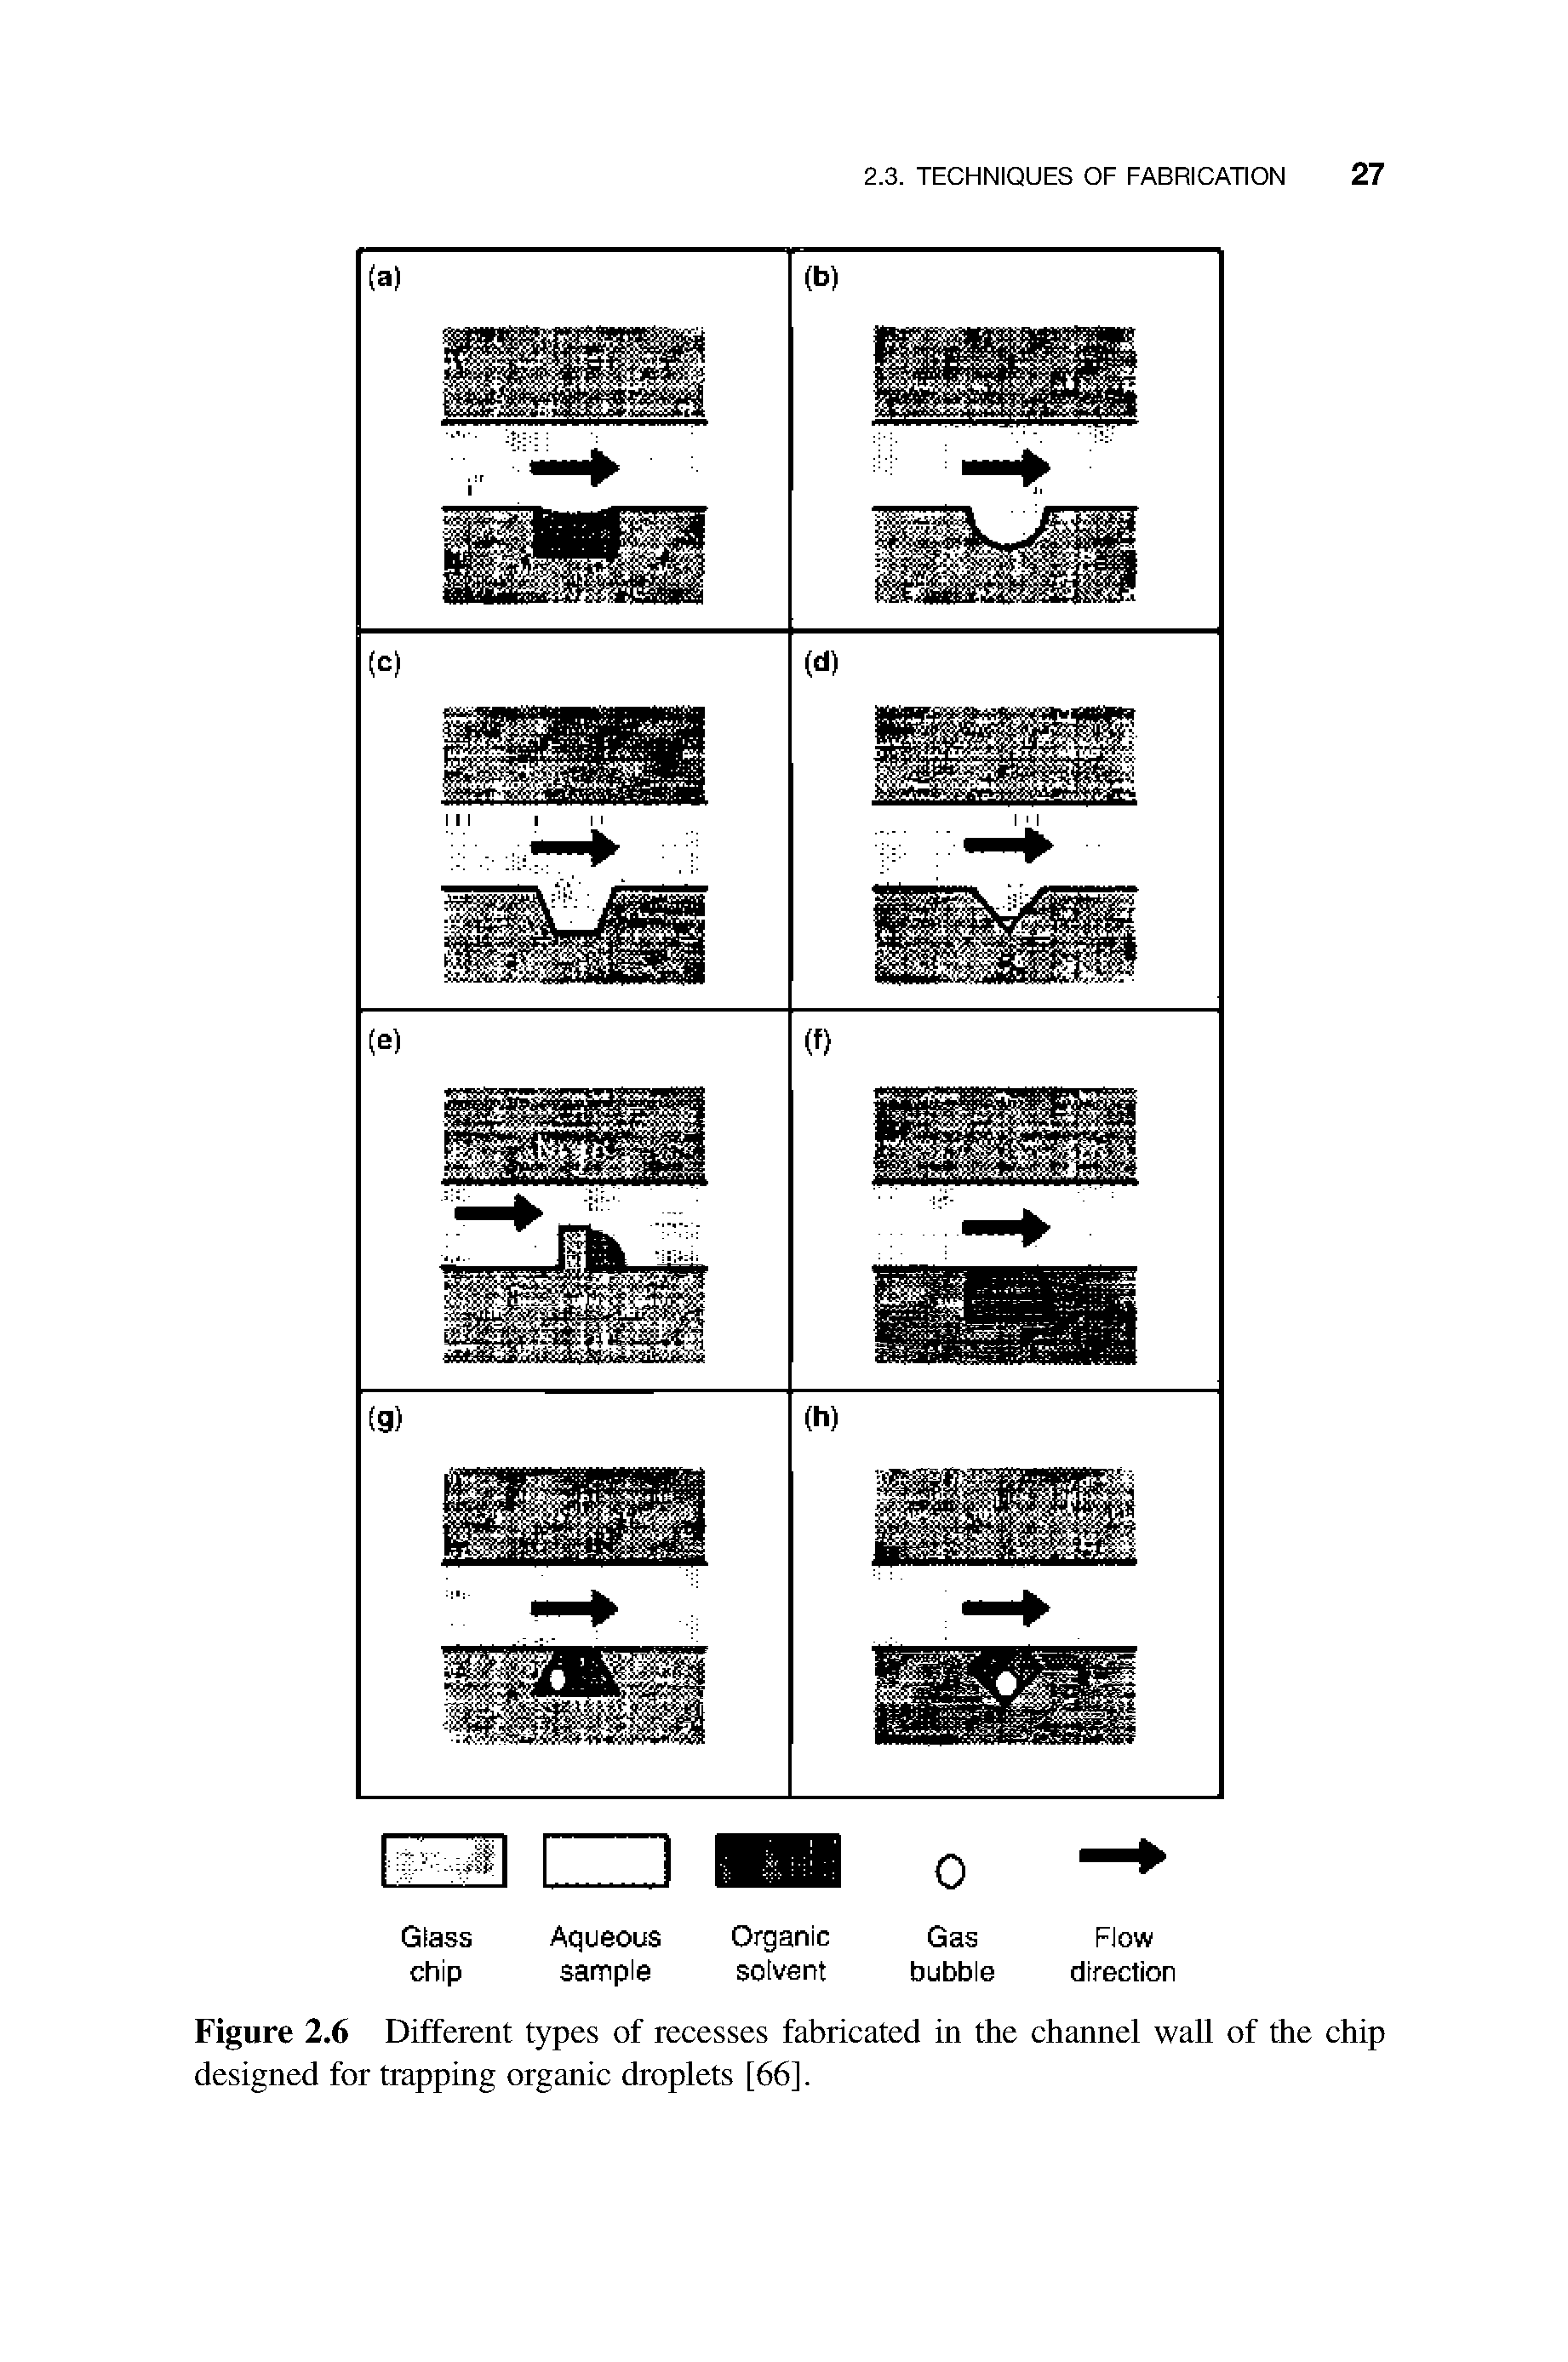 Figure 2.6 Different types of recesses fabricated in the channel wall of the chip designed for trapping organic droplets [66].